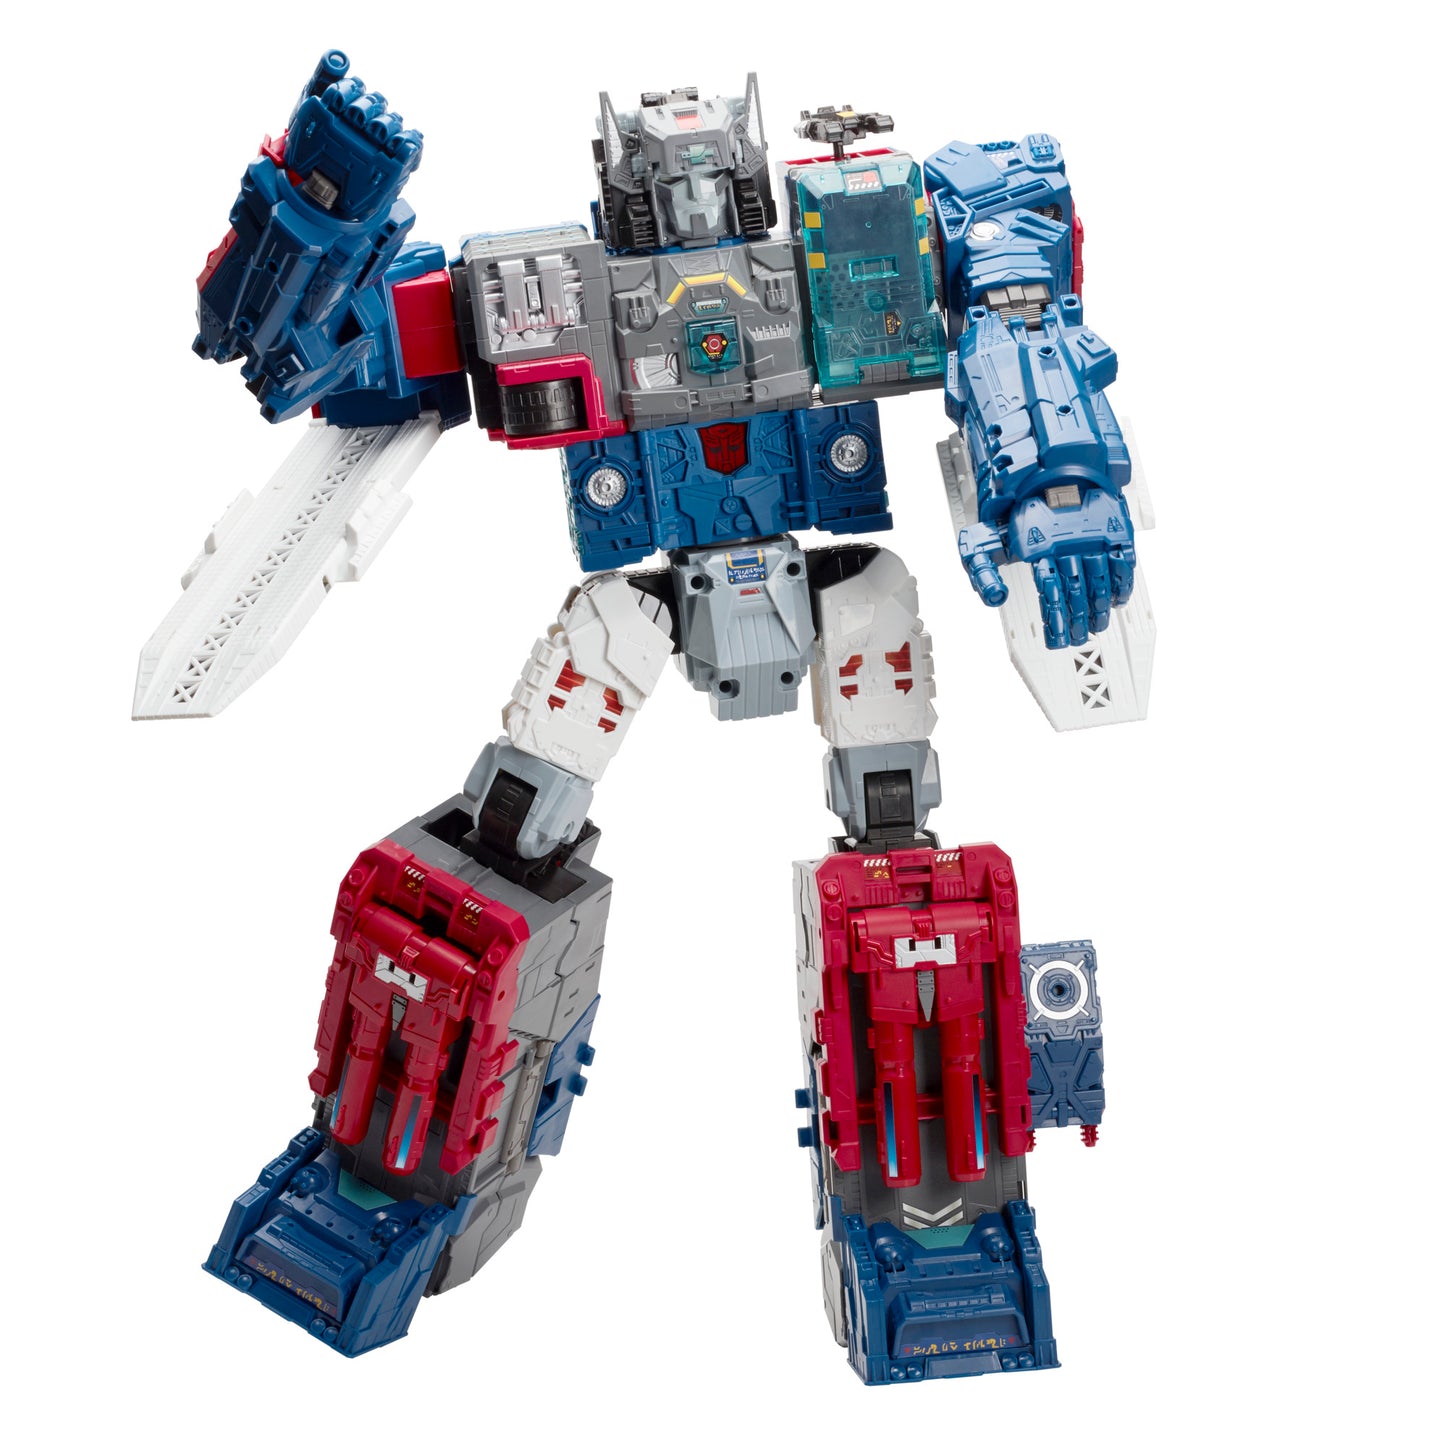 Transformers Generations Titans Return Titan Class Fortress Maximus Action Figure Toy - Heretoserveyou